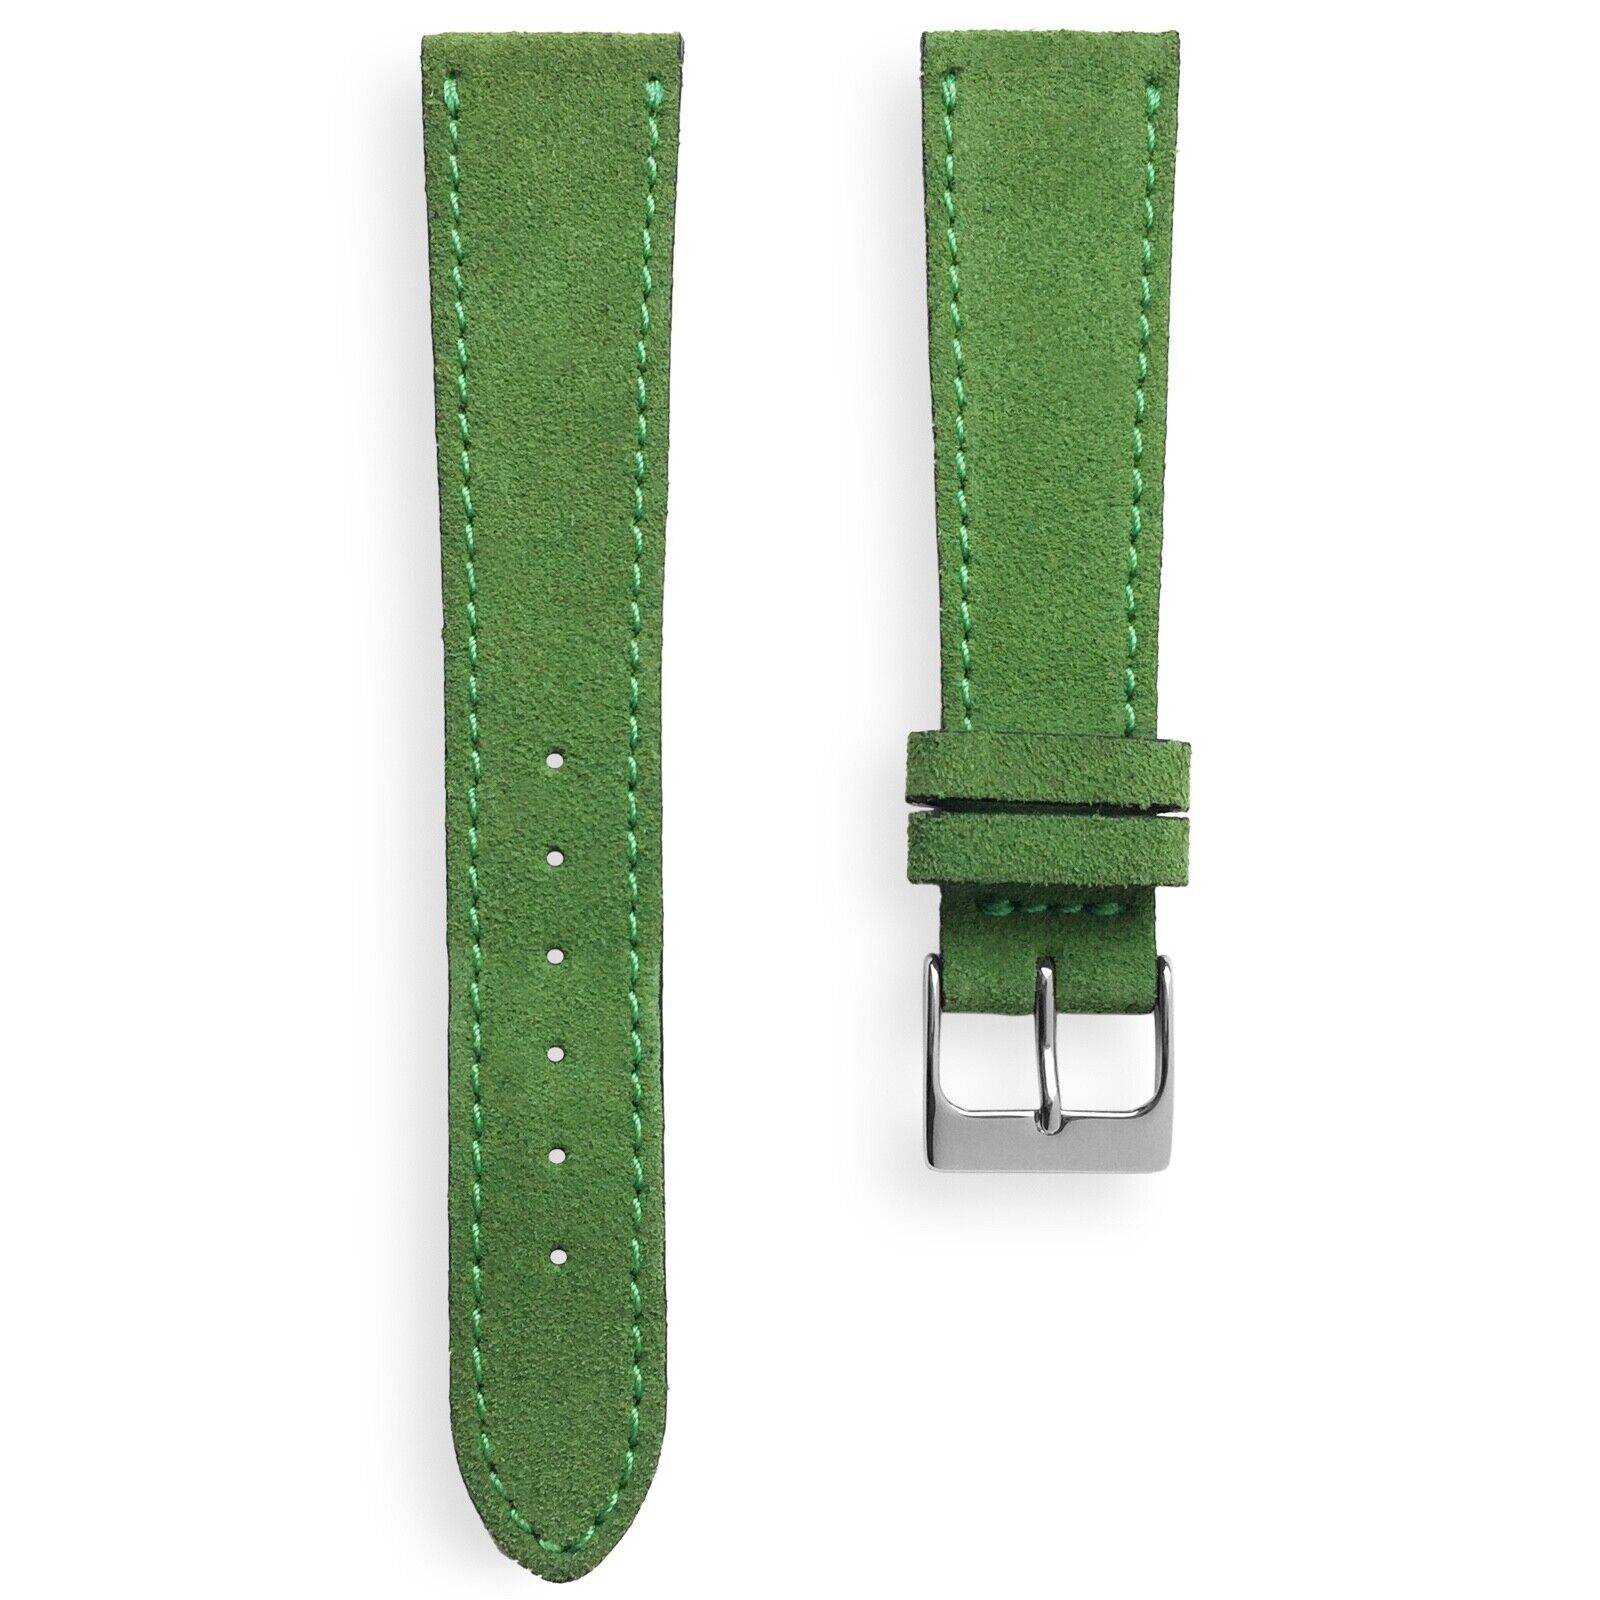 20mm Green Suede German Calf Leather Watch Band Strap with Matching Stitch